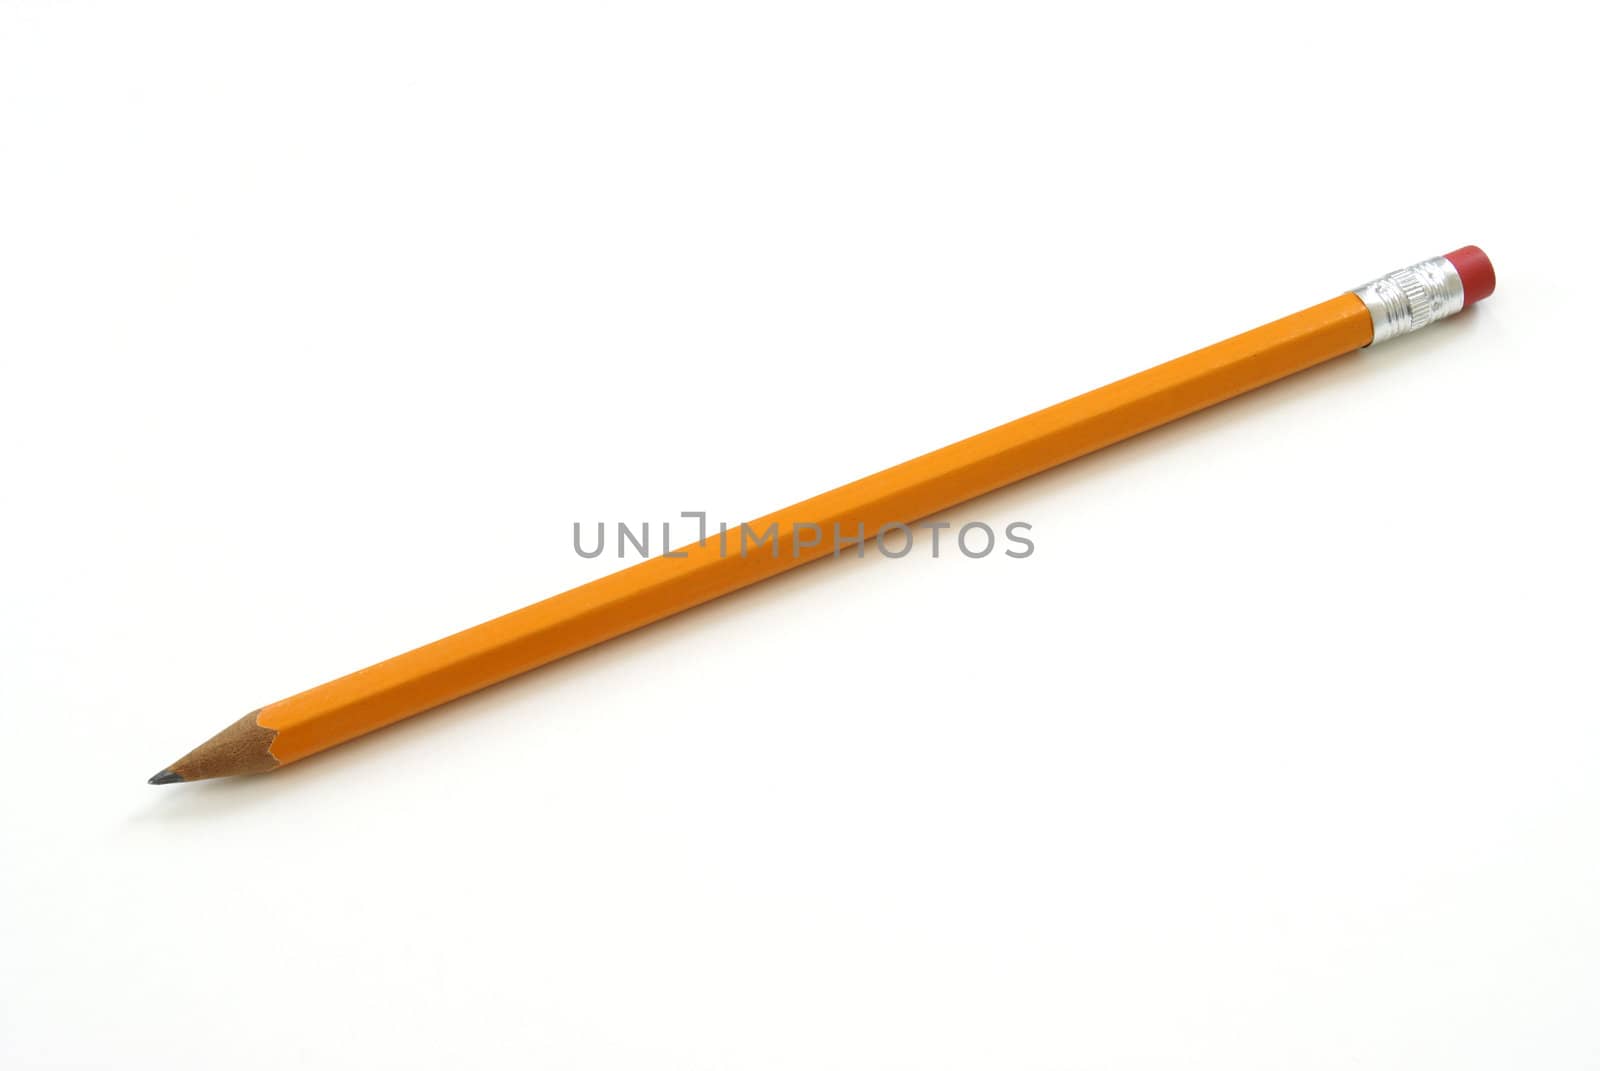 An isolated pencil with an eraser on white background.